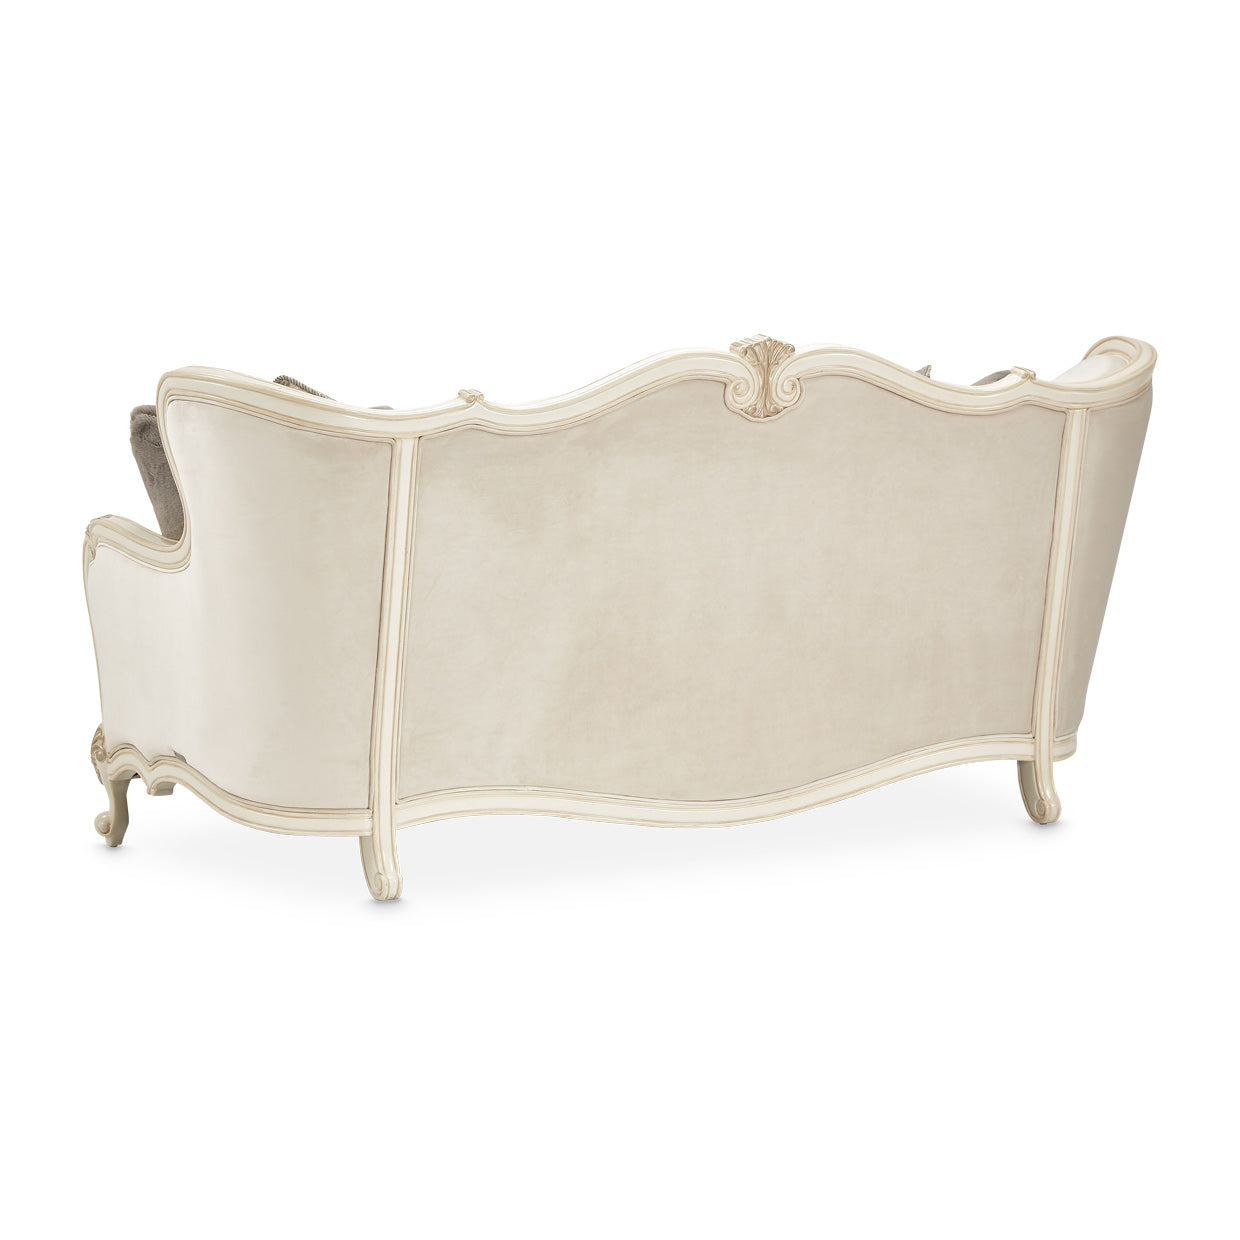 LAVELLE-CLASSIC PEARL Lavelle Sofa Ivory Classic Pearl - Dream art Gallery